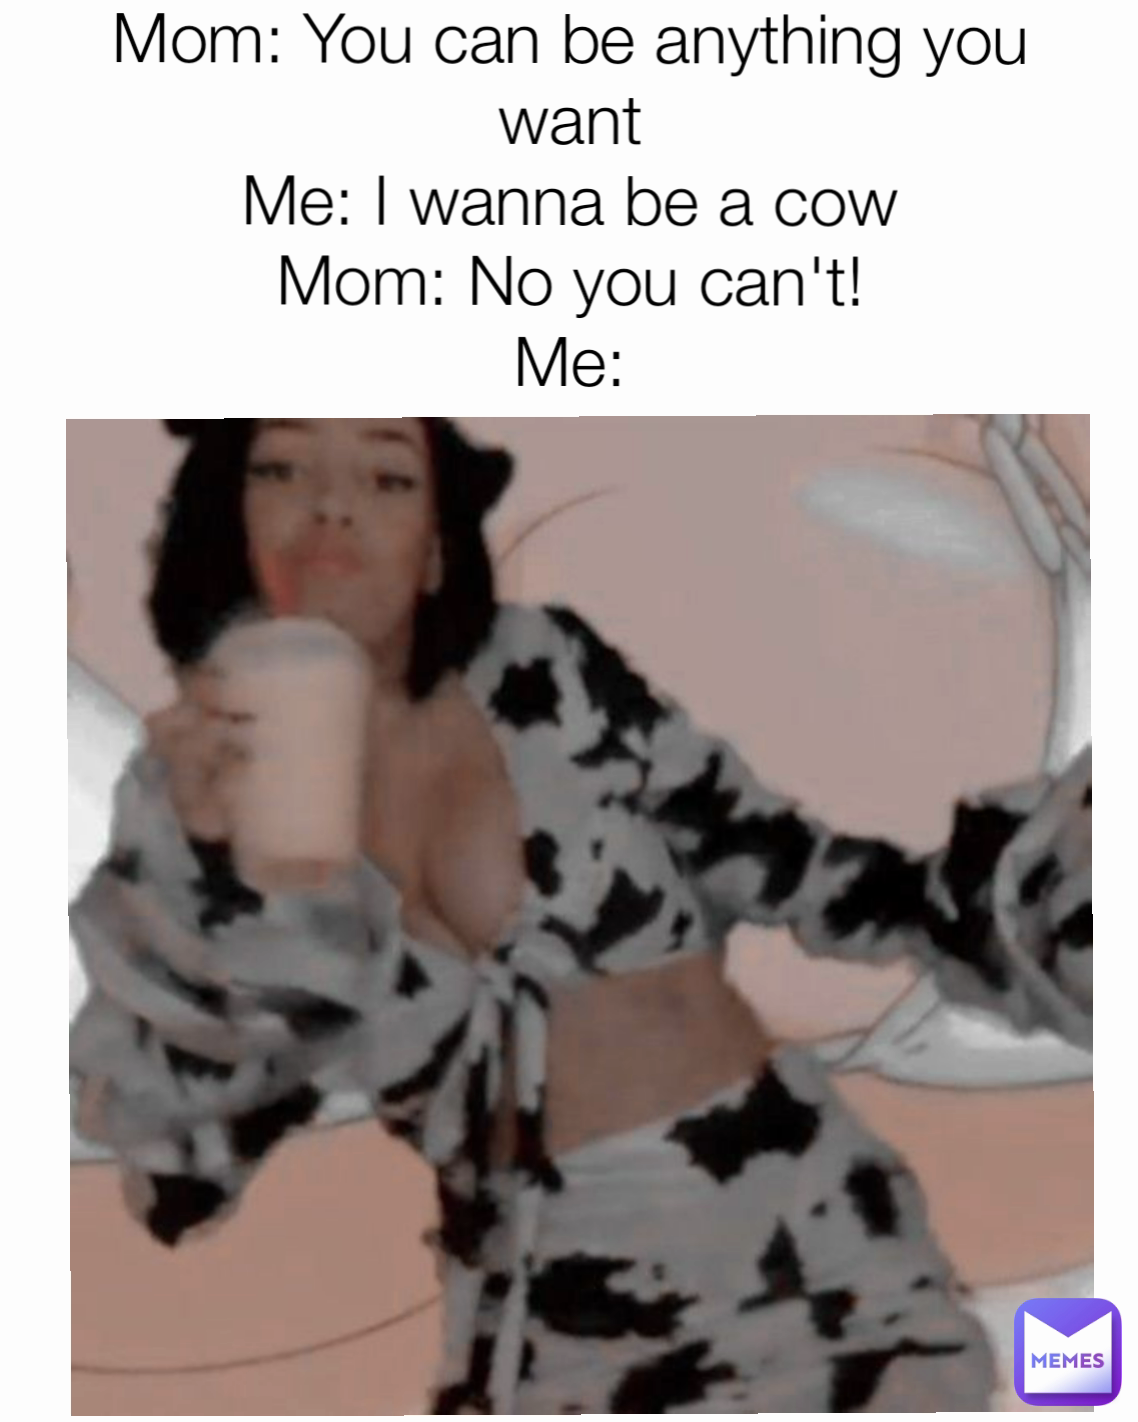 Mom: You can be anything you want
Me: I wanna be a cow
Mom: No you can't!
Me: